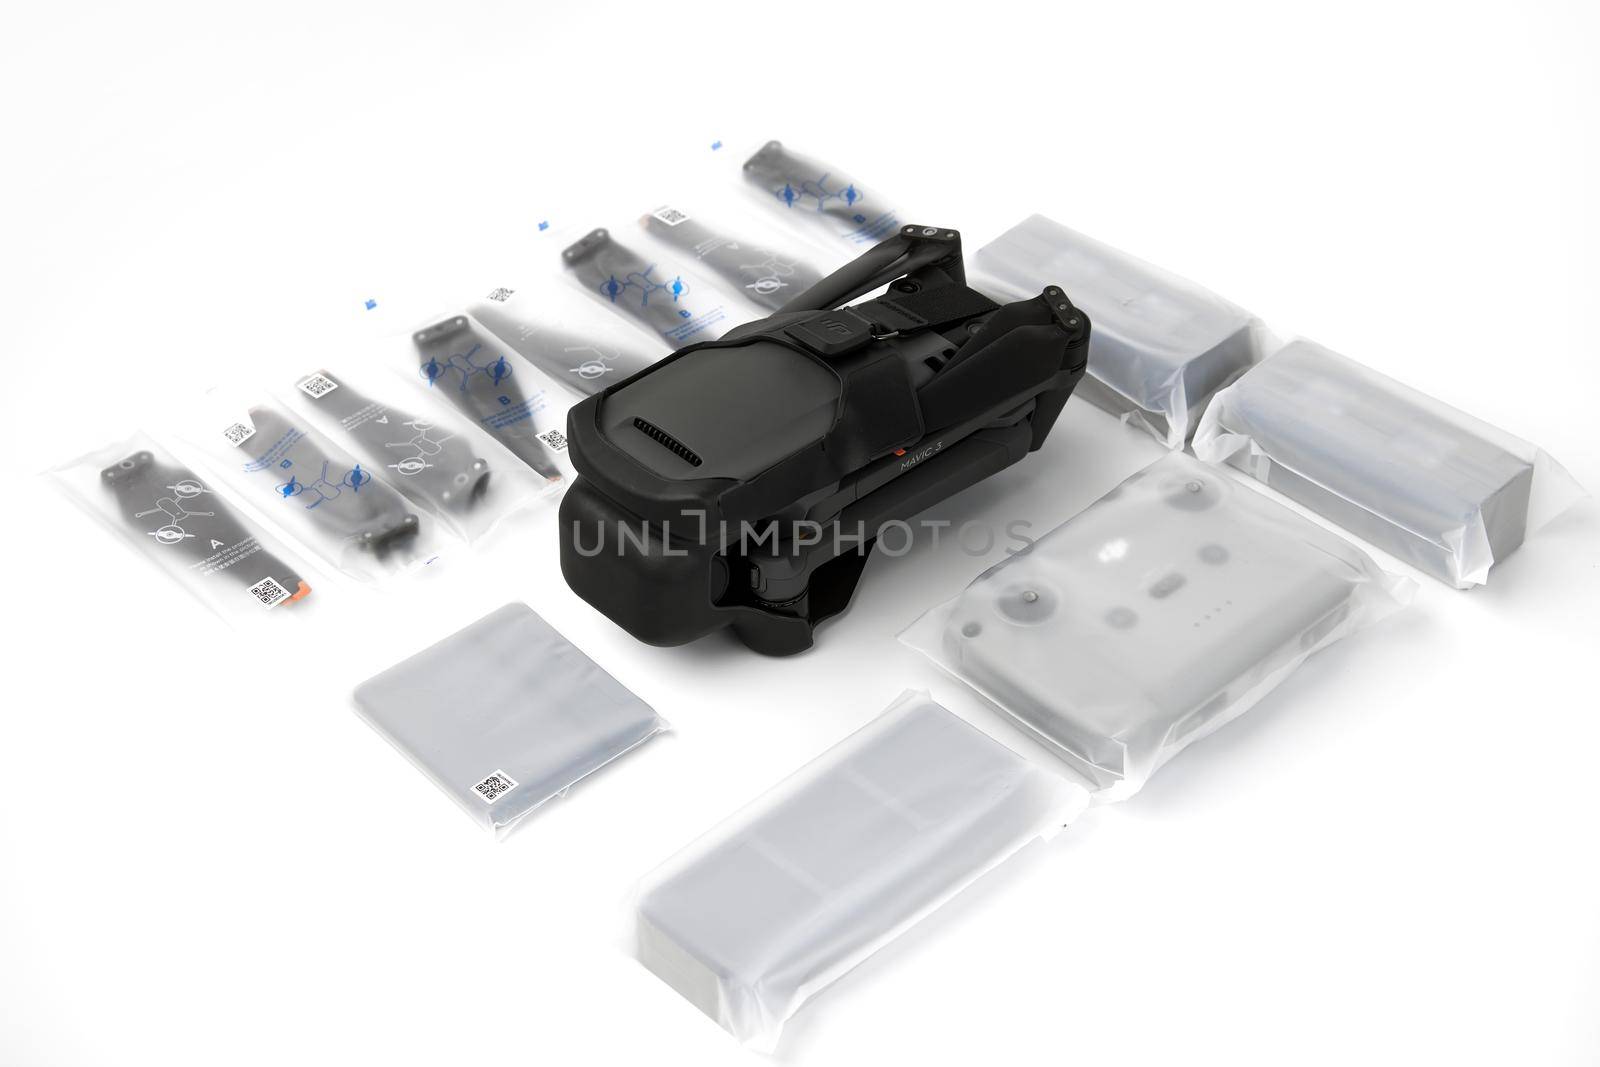 New DJI Mavic 3 drone on a white background when unpacking. Parts of the delivery set in the original packaging. DJI world leader developer and manufacturers in UAV. 17.12.2021, Rostov region, Russia.